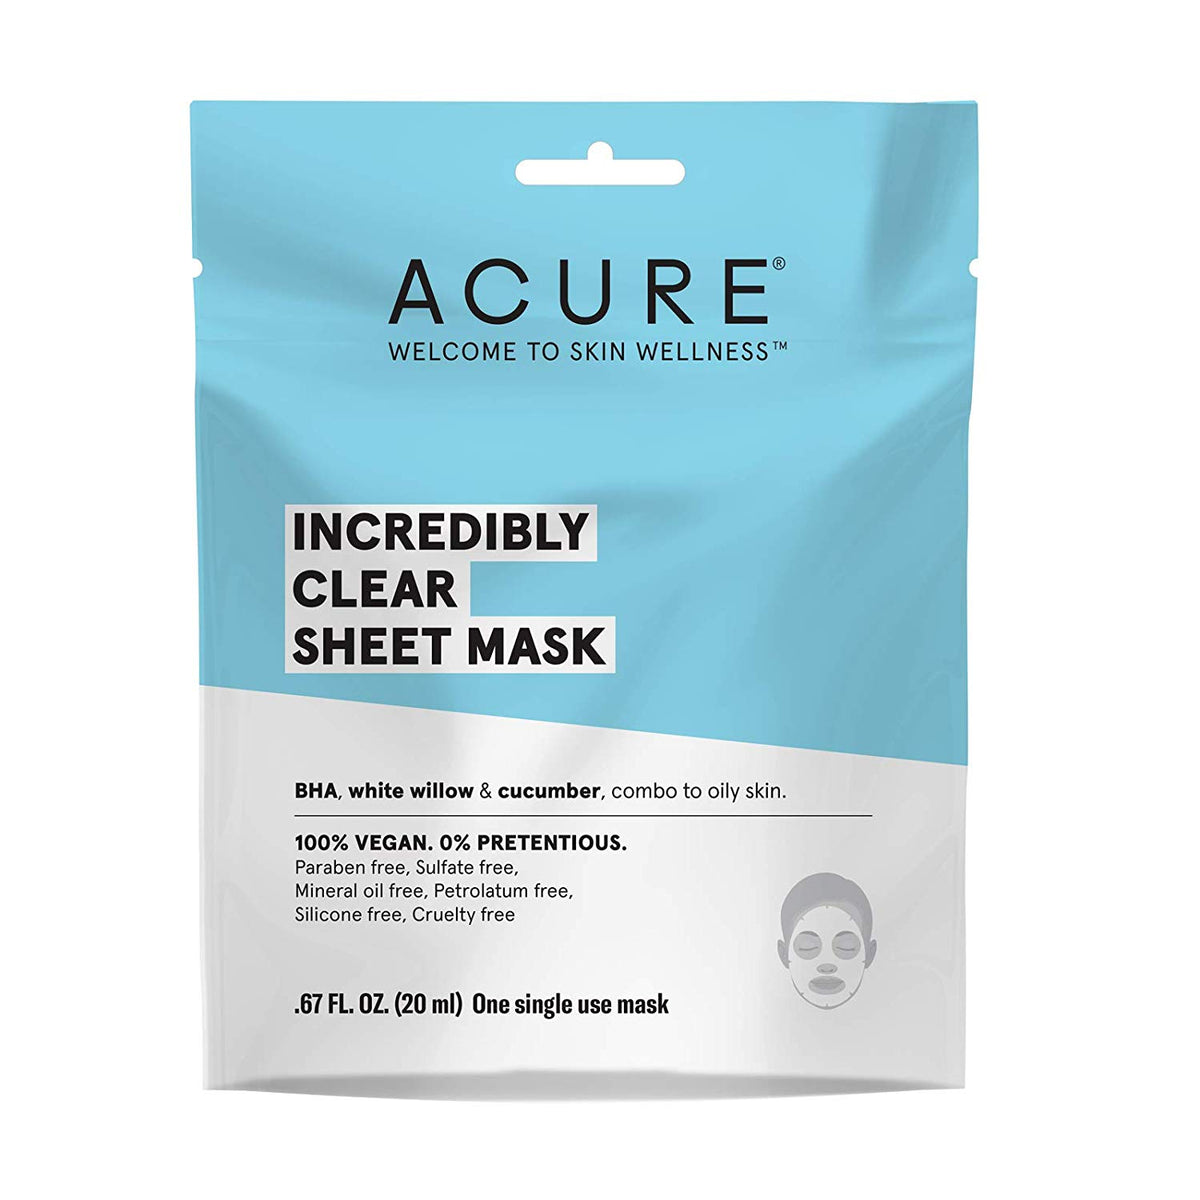 Incredibly clear sheet mask